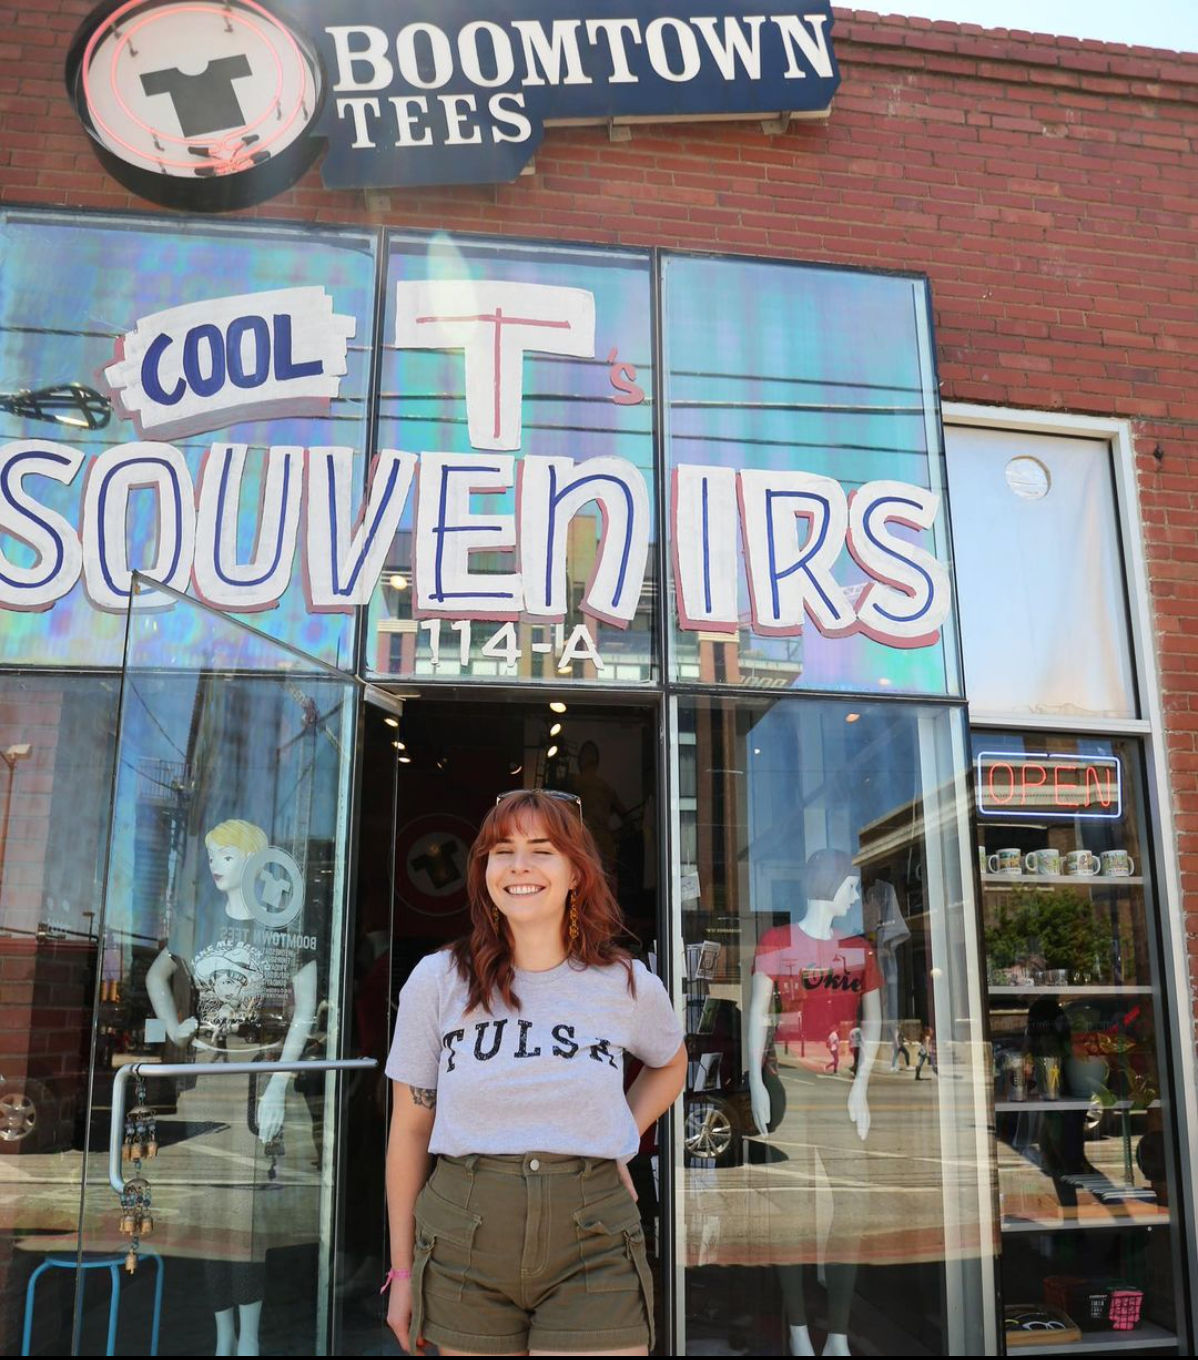 Image of Boomtown Tees storefront and owner Michelle Cozzaglio